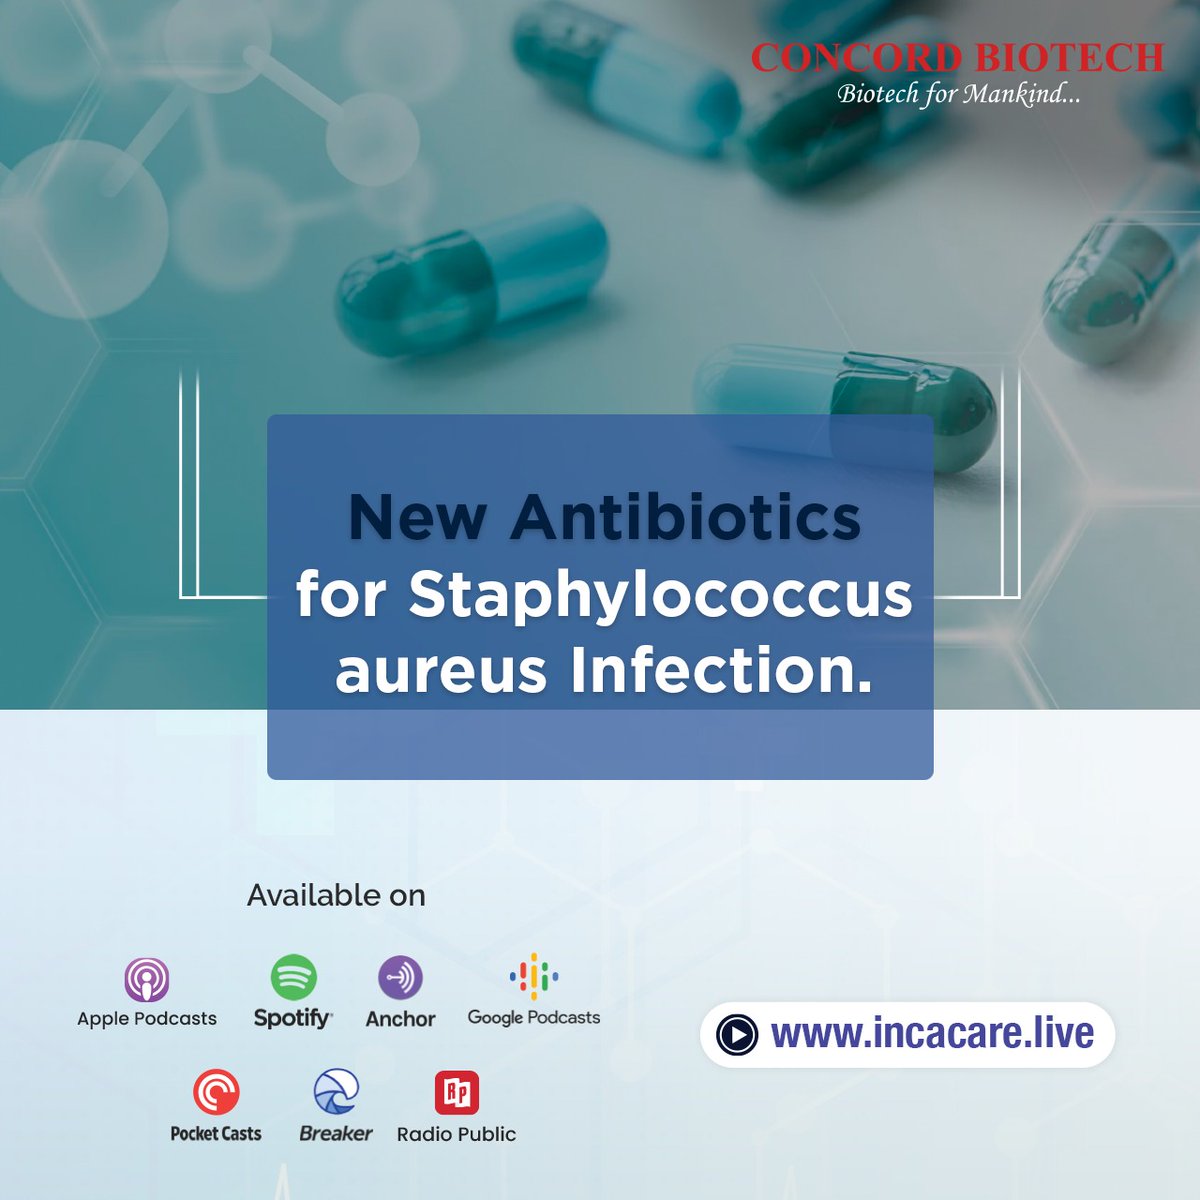 Join us on the #GoodHealthConquest as we discuss #Staphylococcusaureus & the antibiotics designed to combat its evolving resistance.
Listen now: spotifyanchor-web.app.link/e/s8YaWVBCNGb
To read more, visit incacare.live

#Infection #antibioticresistance #antistaphylococcaldrugs #Podcast